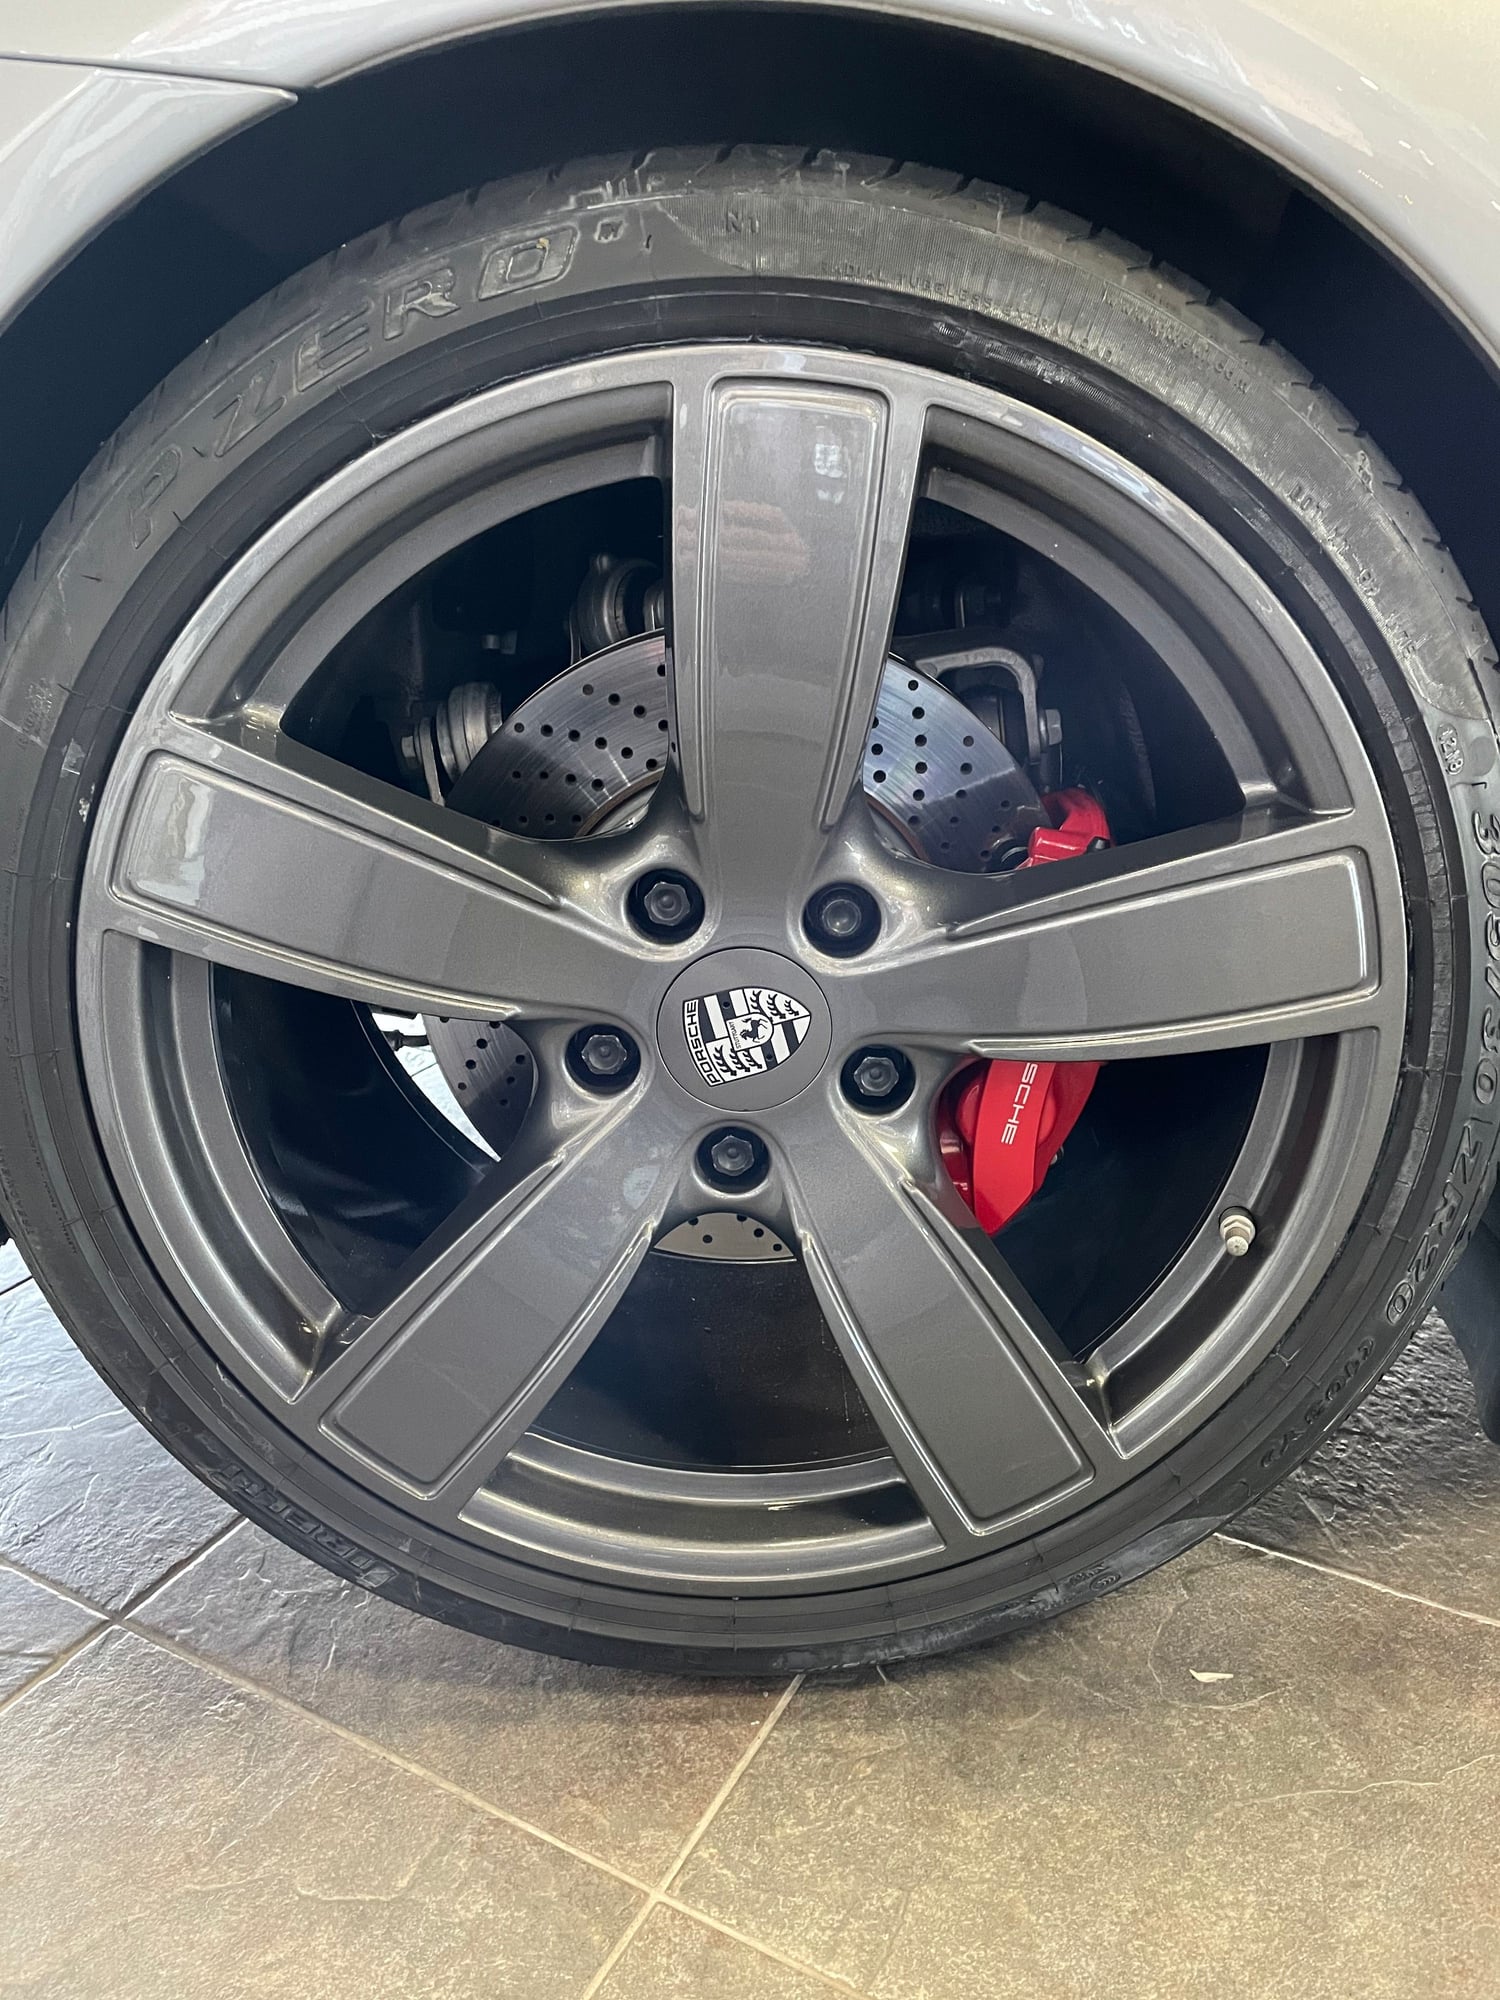 Wheels and Tires/Axles - Carrera T wheels and tires - 20" Carrera Sport style - Used - 2017 to 2019 Porsche 911 - Harrisonburg, VA 22801, United States